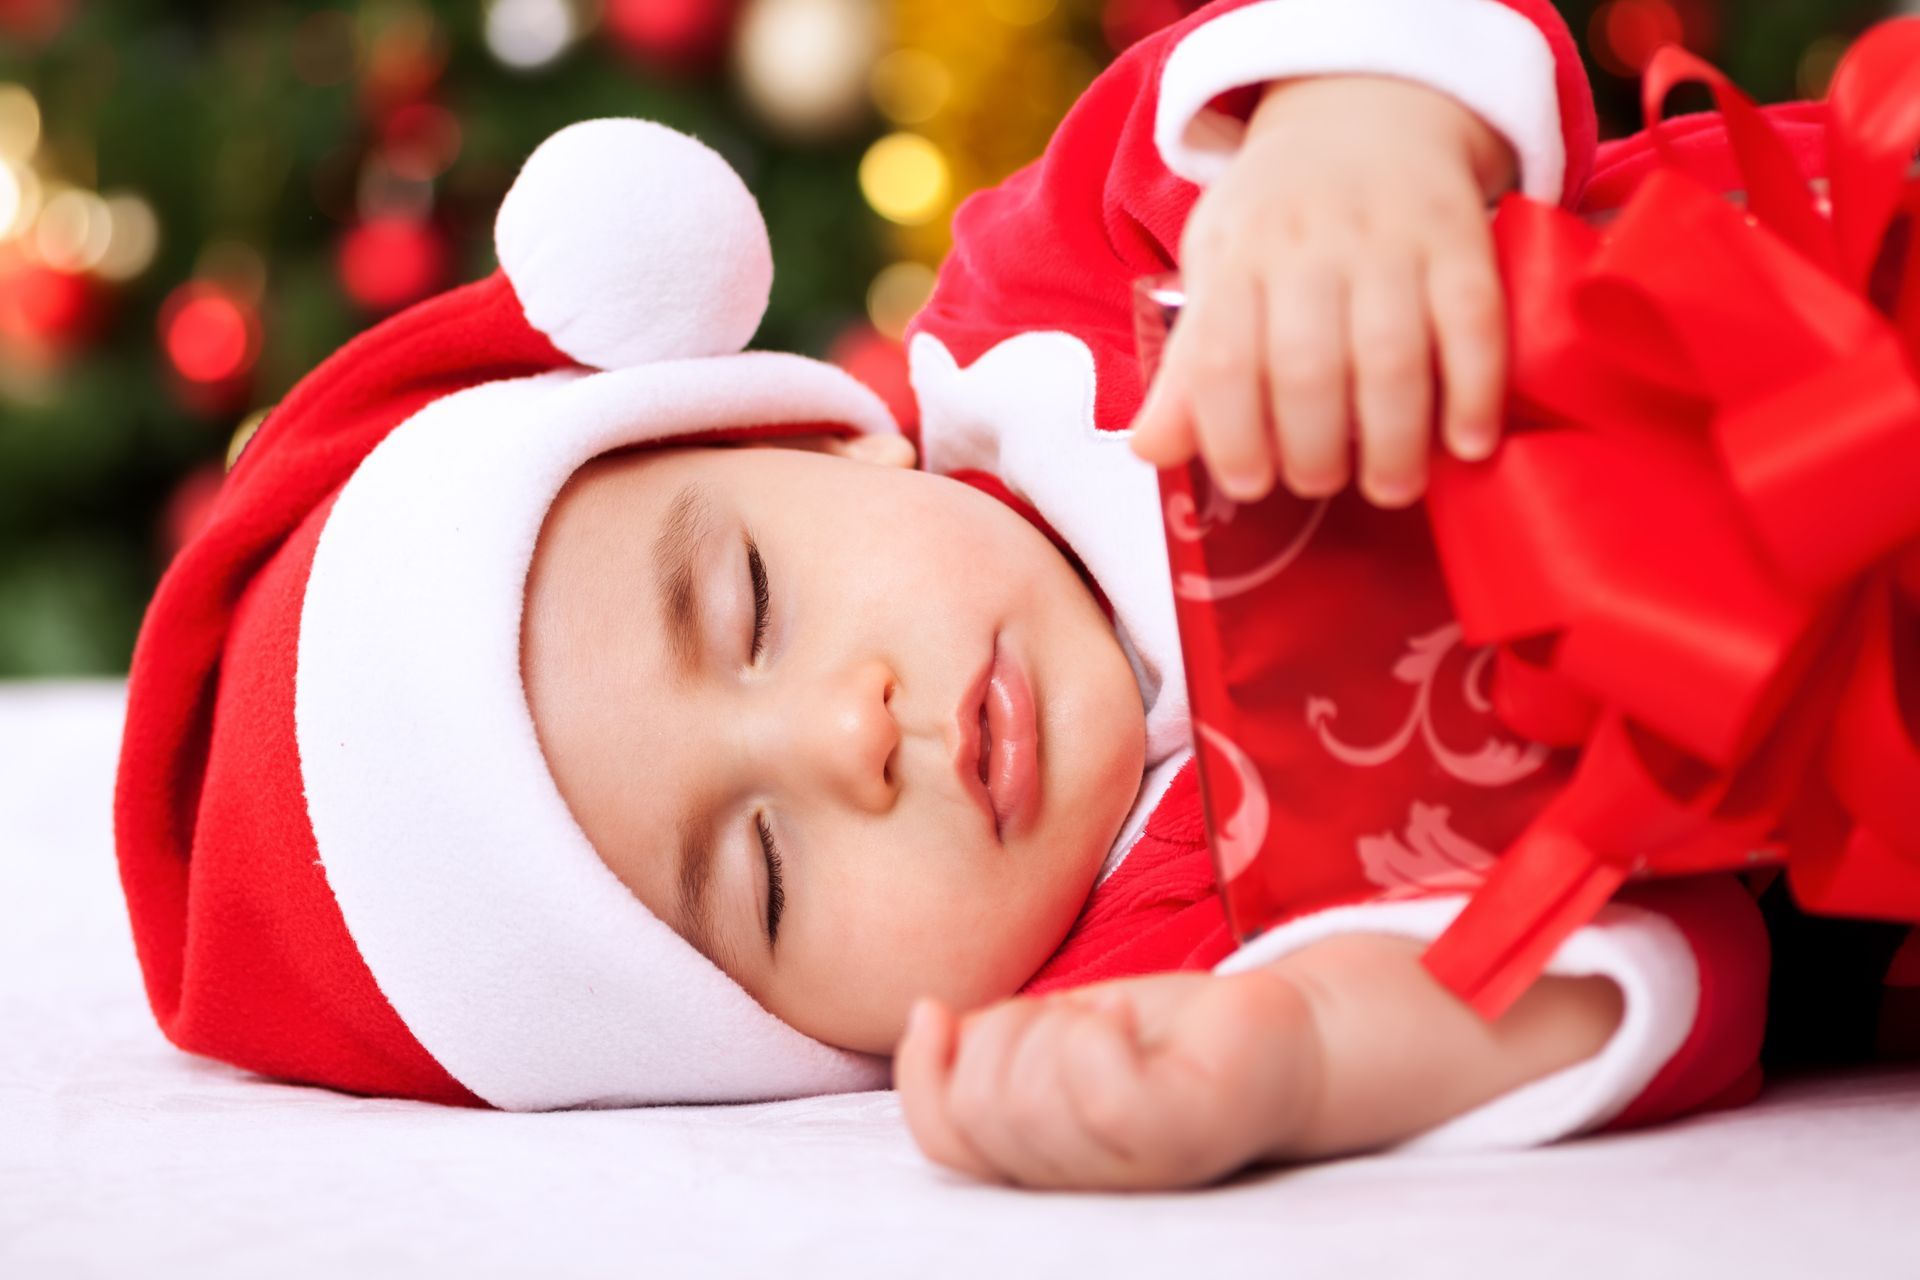 Sleepy baby dressed in Christmas outfit